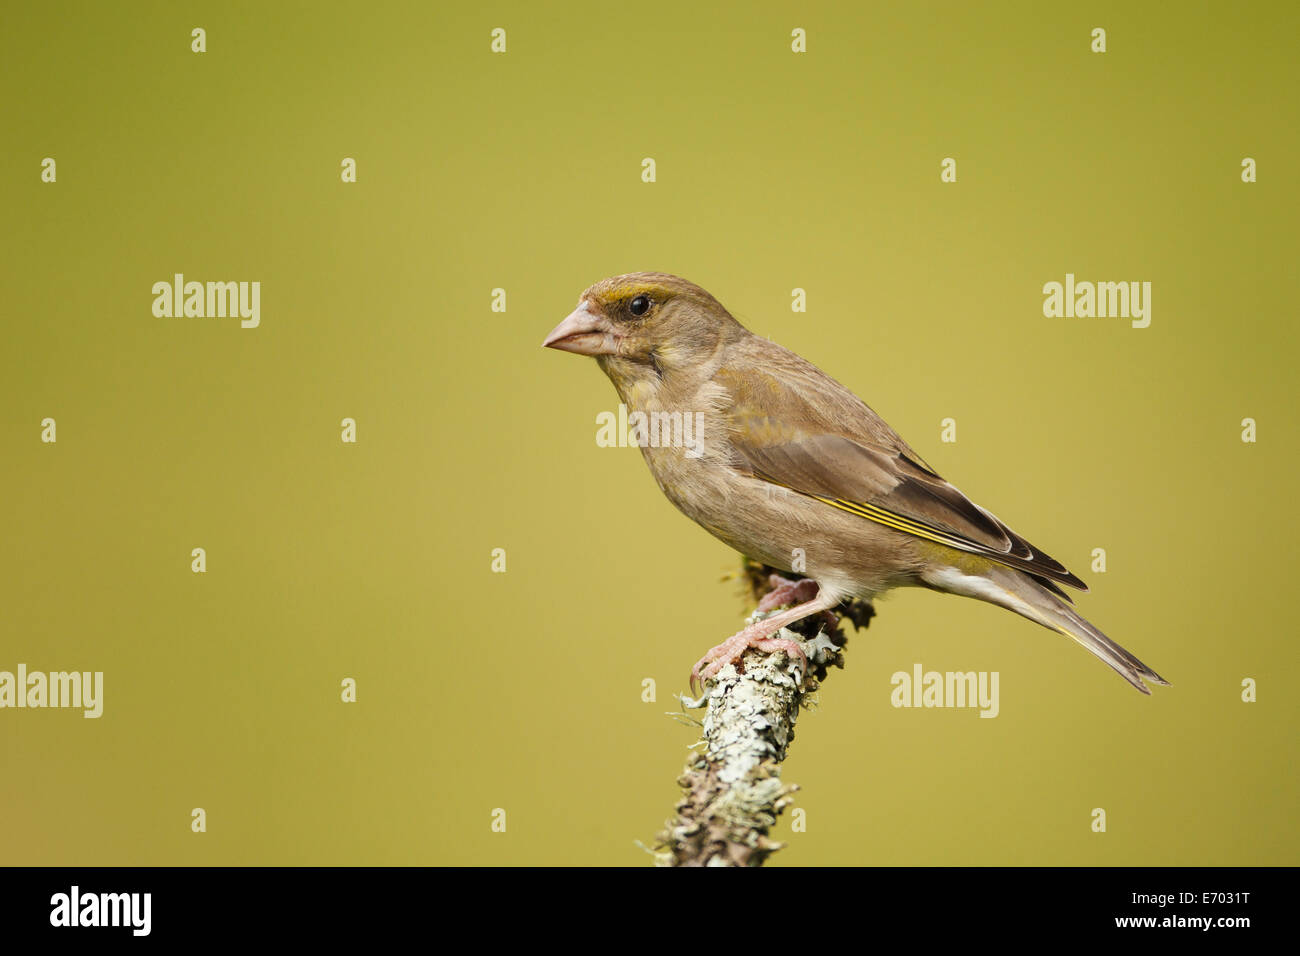 Female Greenfinch perched on a lichen cover branch - UK Stock Photo